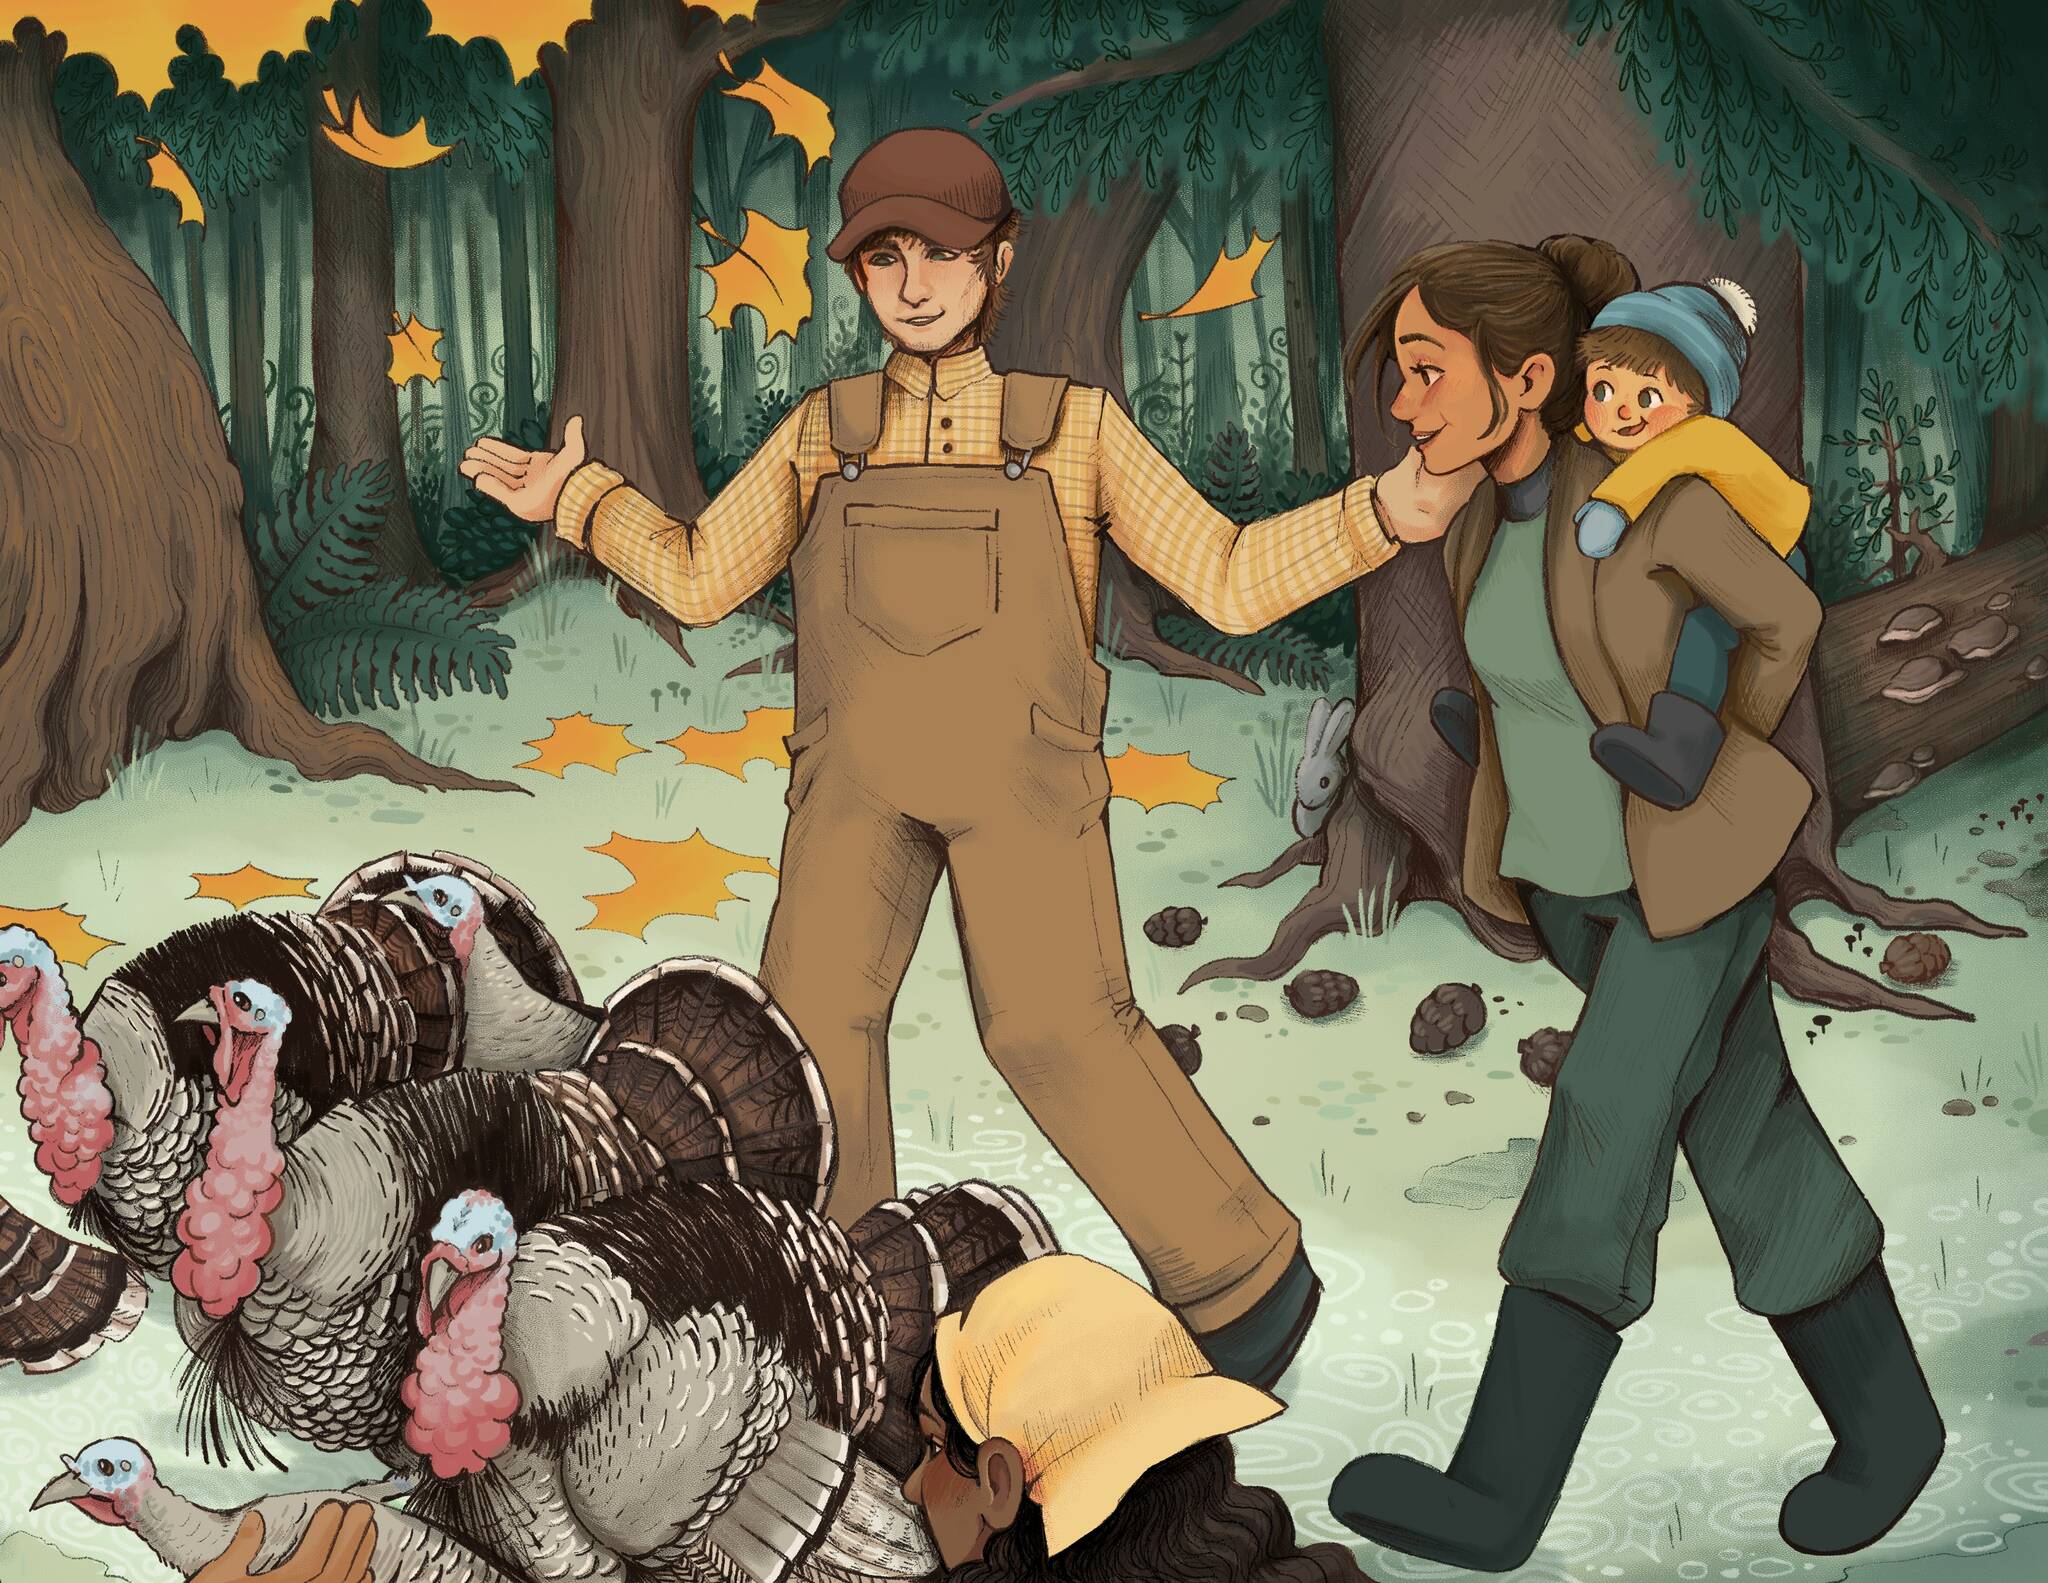 In “Thankful Harvest,” a family prepares to harvest a flock of turkeys on their farm. (Illustration by Heather Talley)